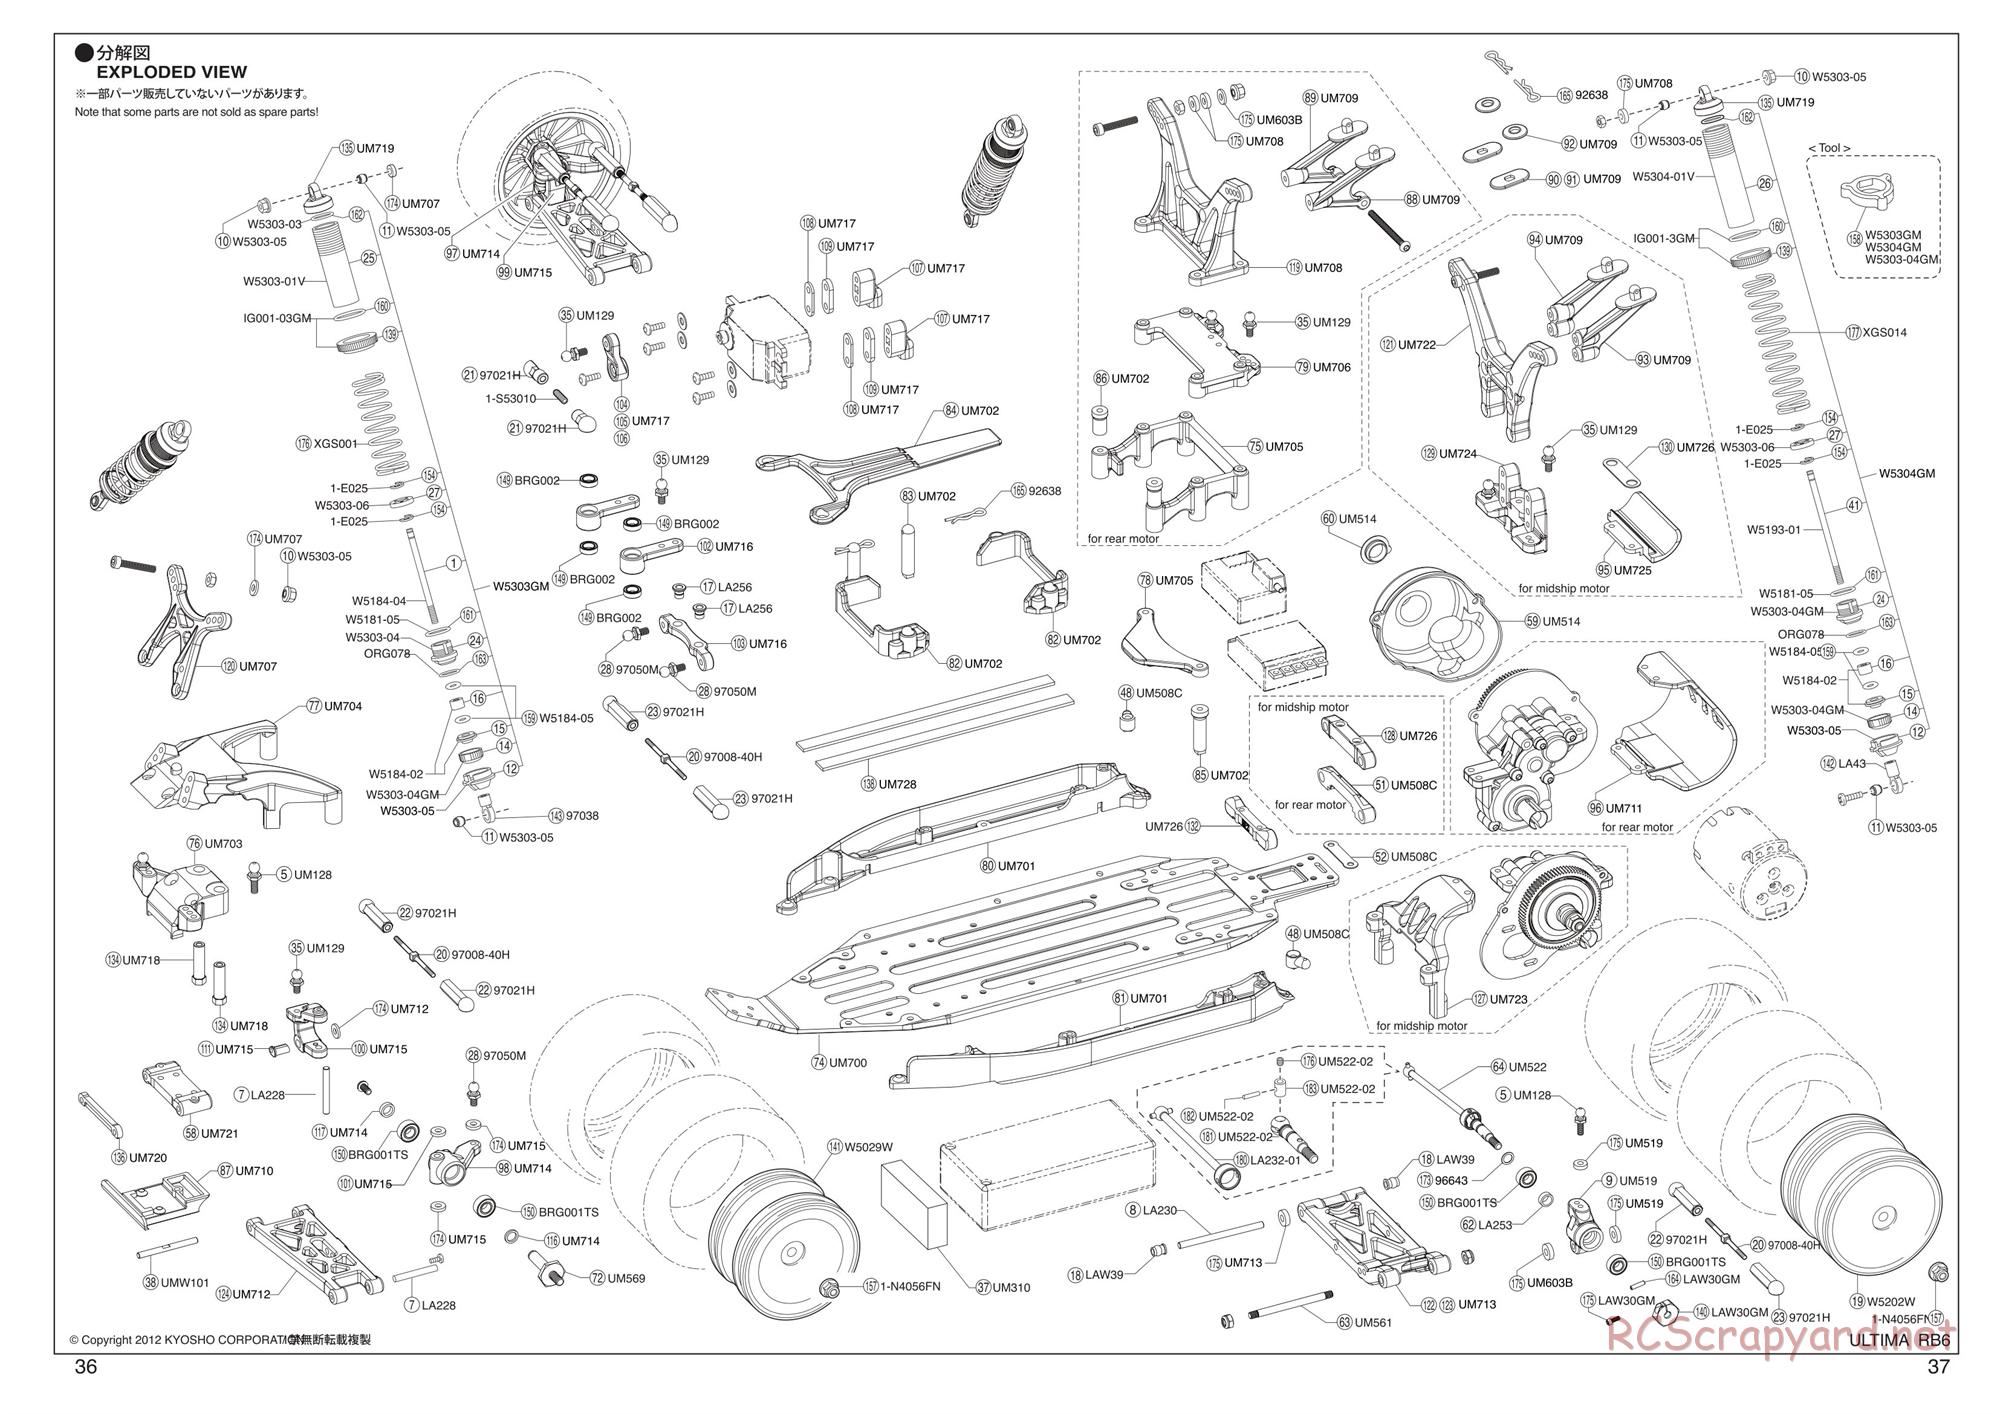 Kyosho - Ultima RB6 - Exploded Views - Page 1